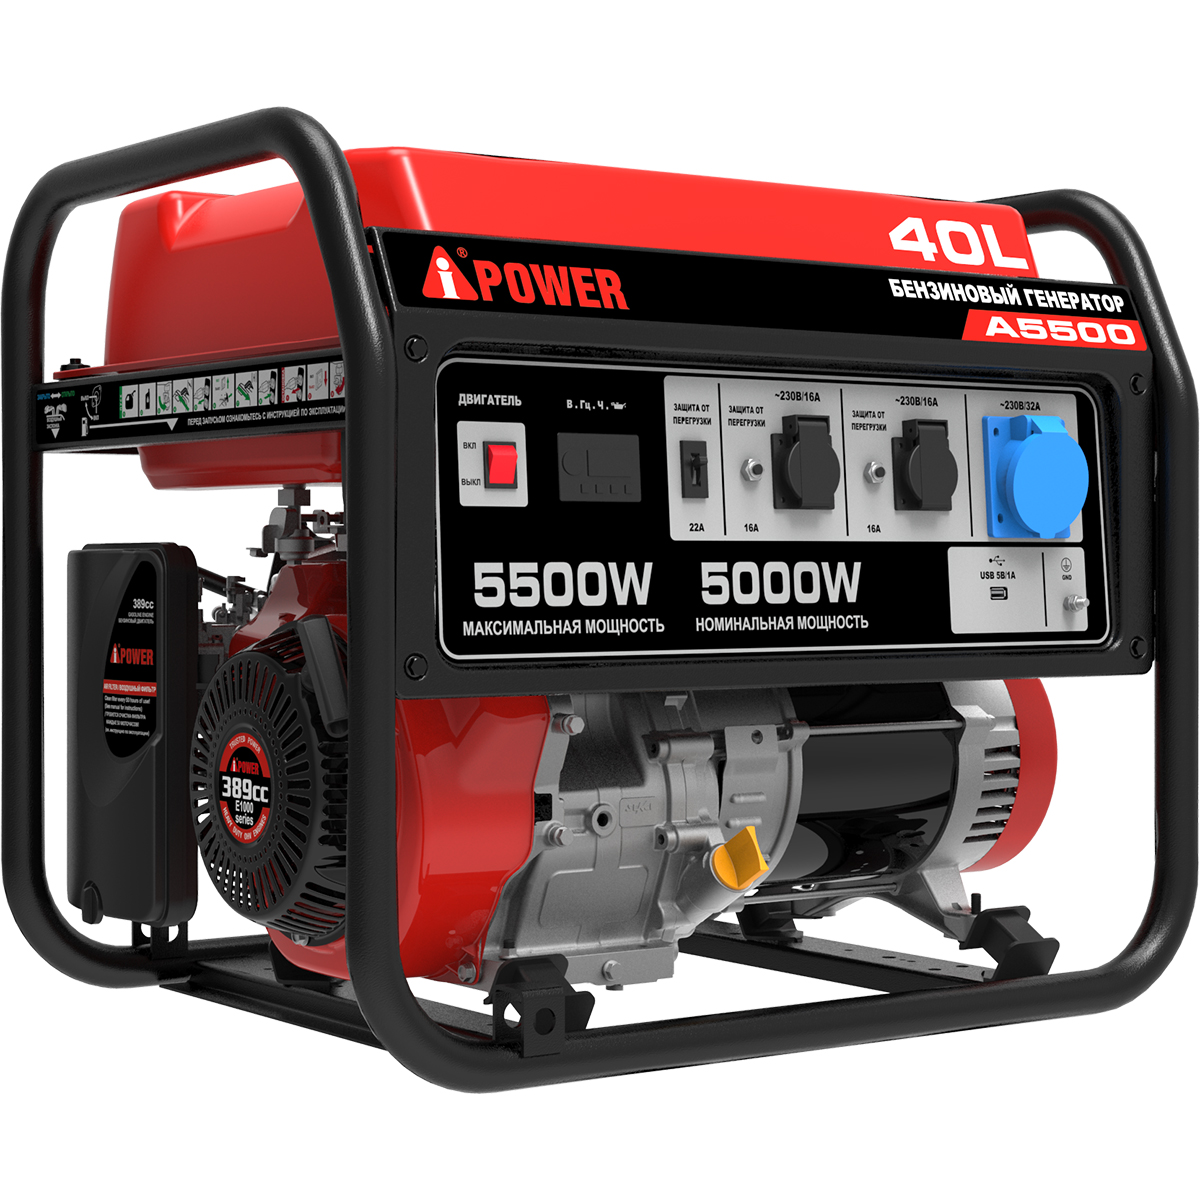   A-iPower A5500 20105